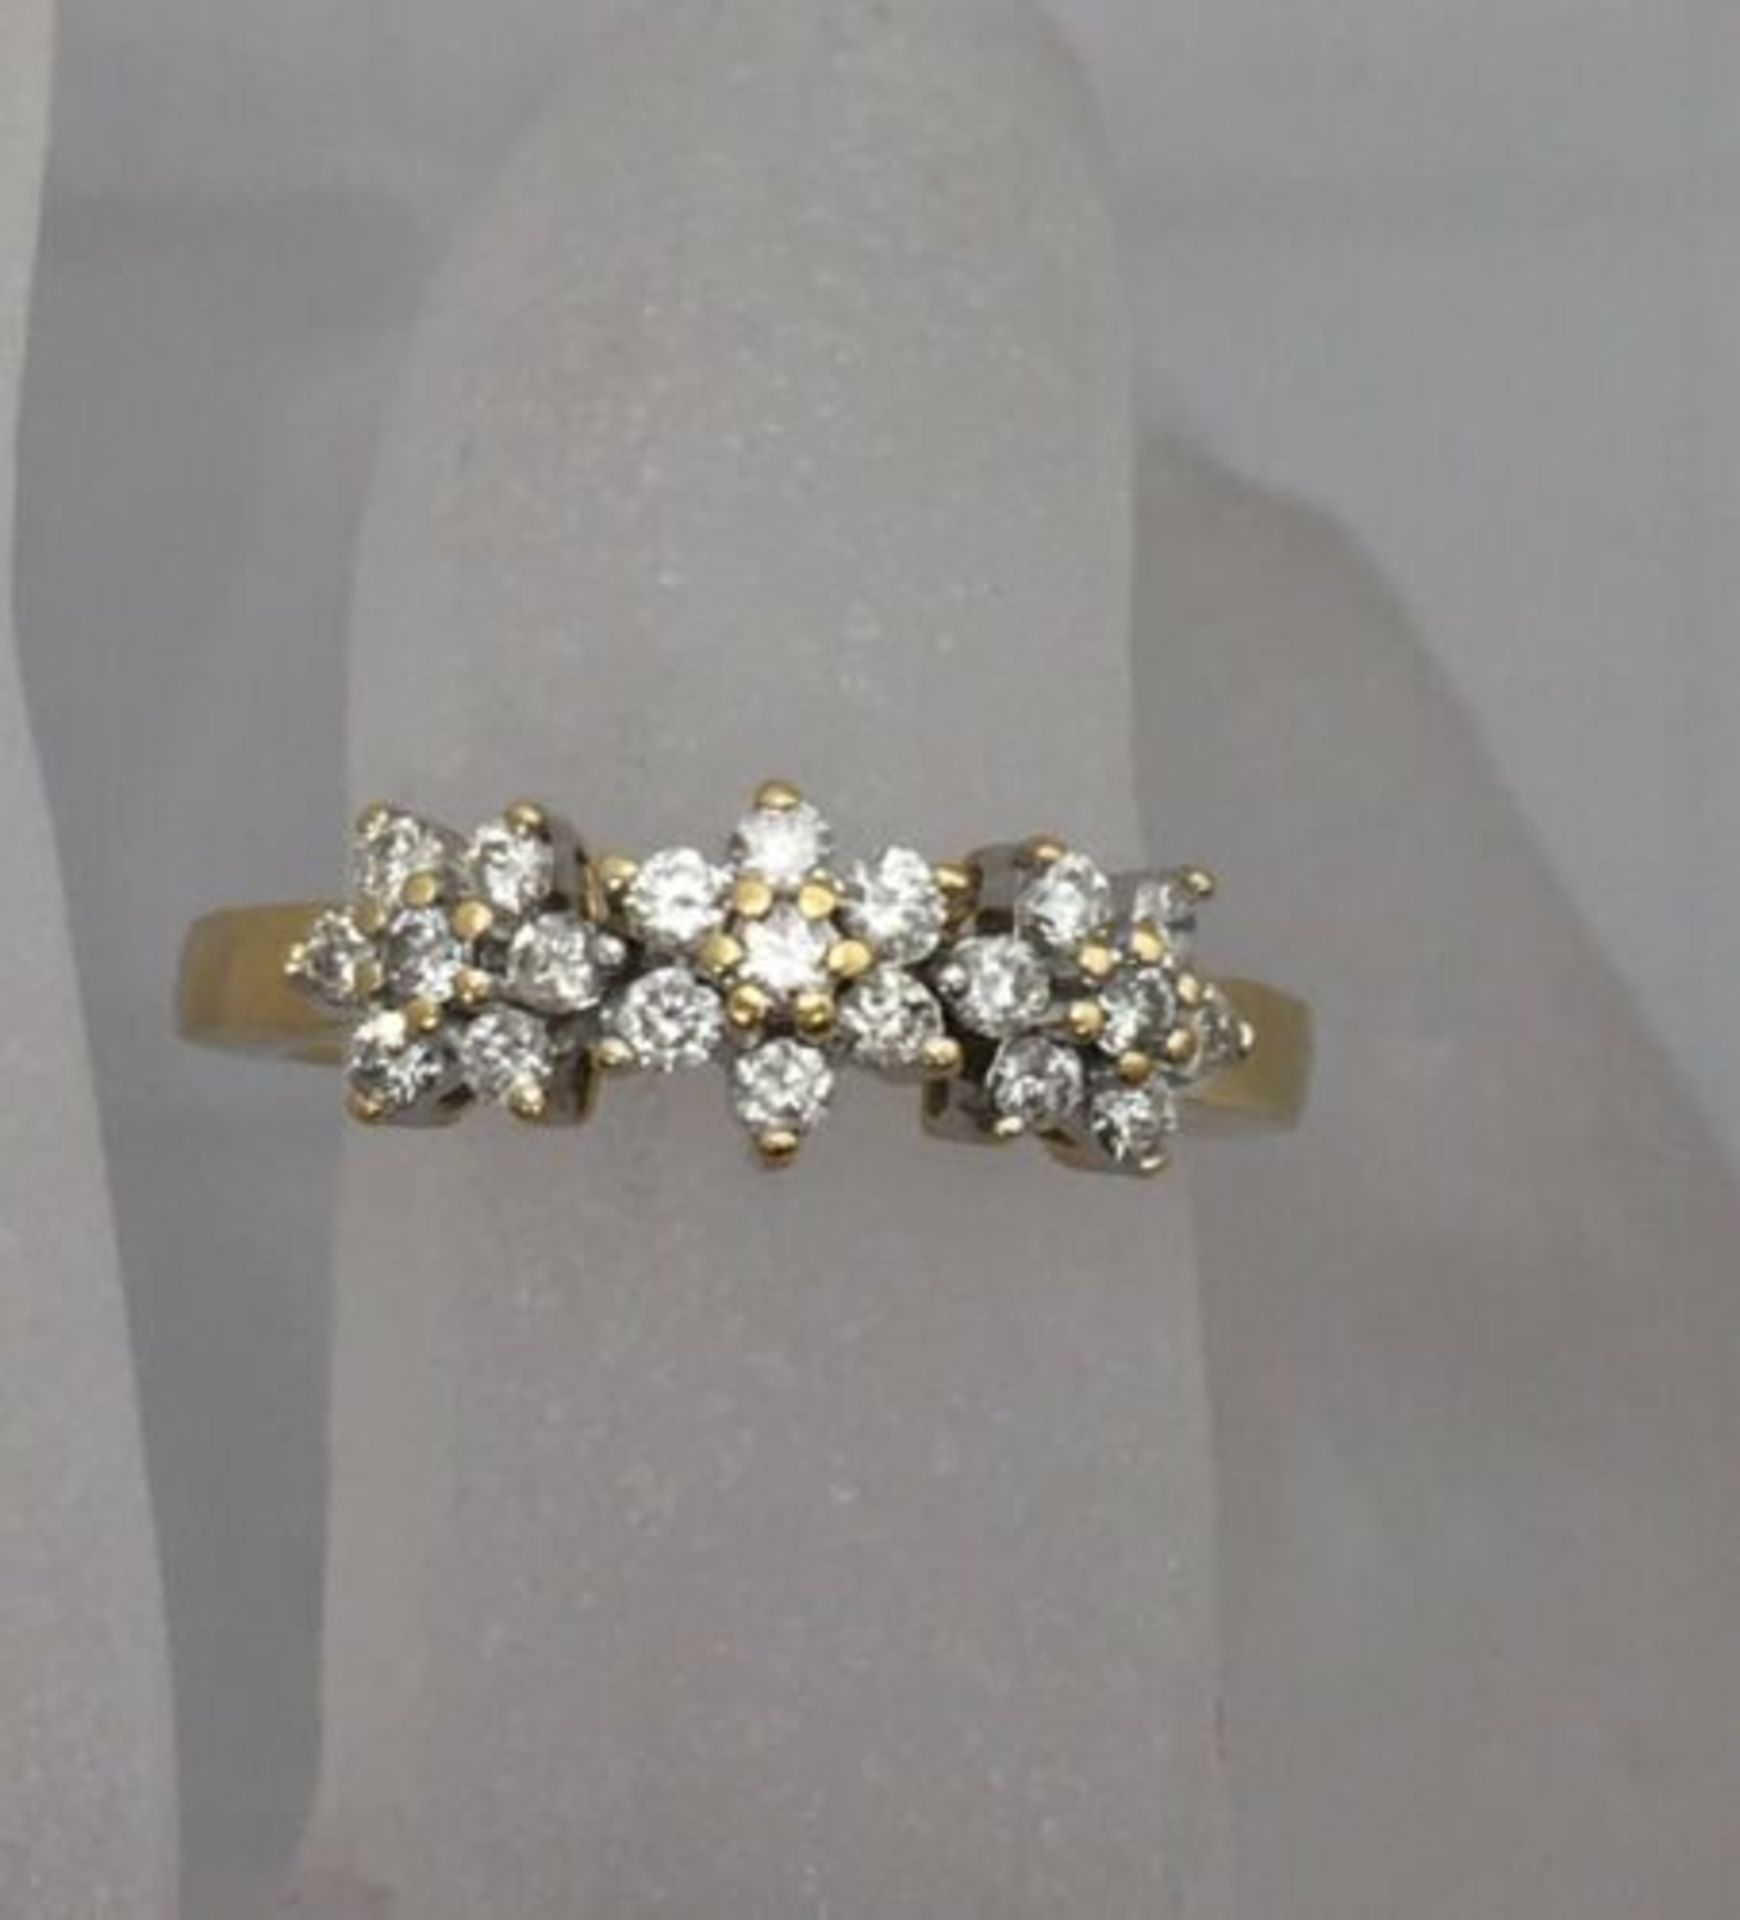 CLUSTER DIAMOND DRESS/ENGAGEMENT RING 18CT YELLOW GOLD + GIFT BOX + VALUATION CERT OF £995 - Image 4 of 4